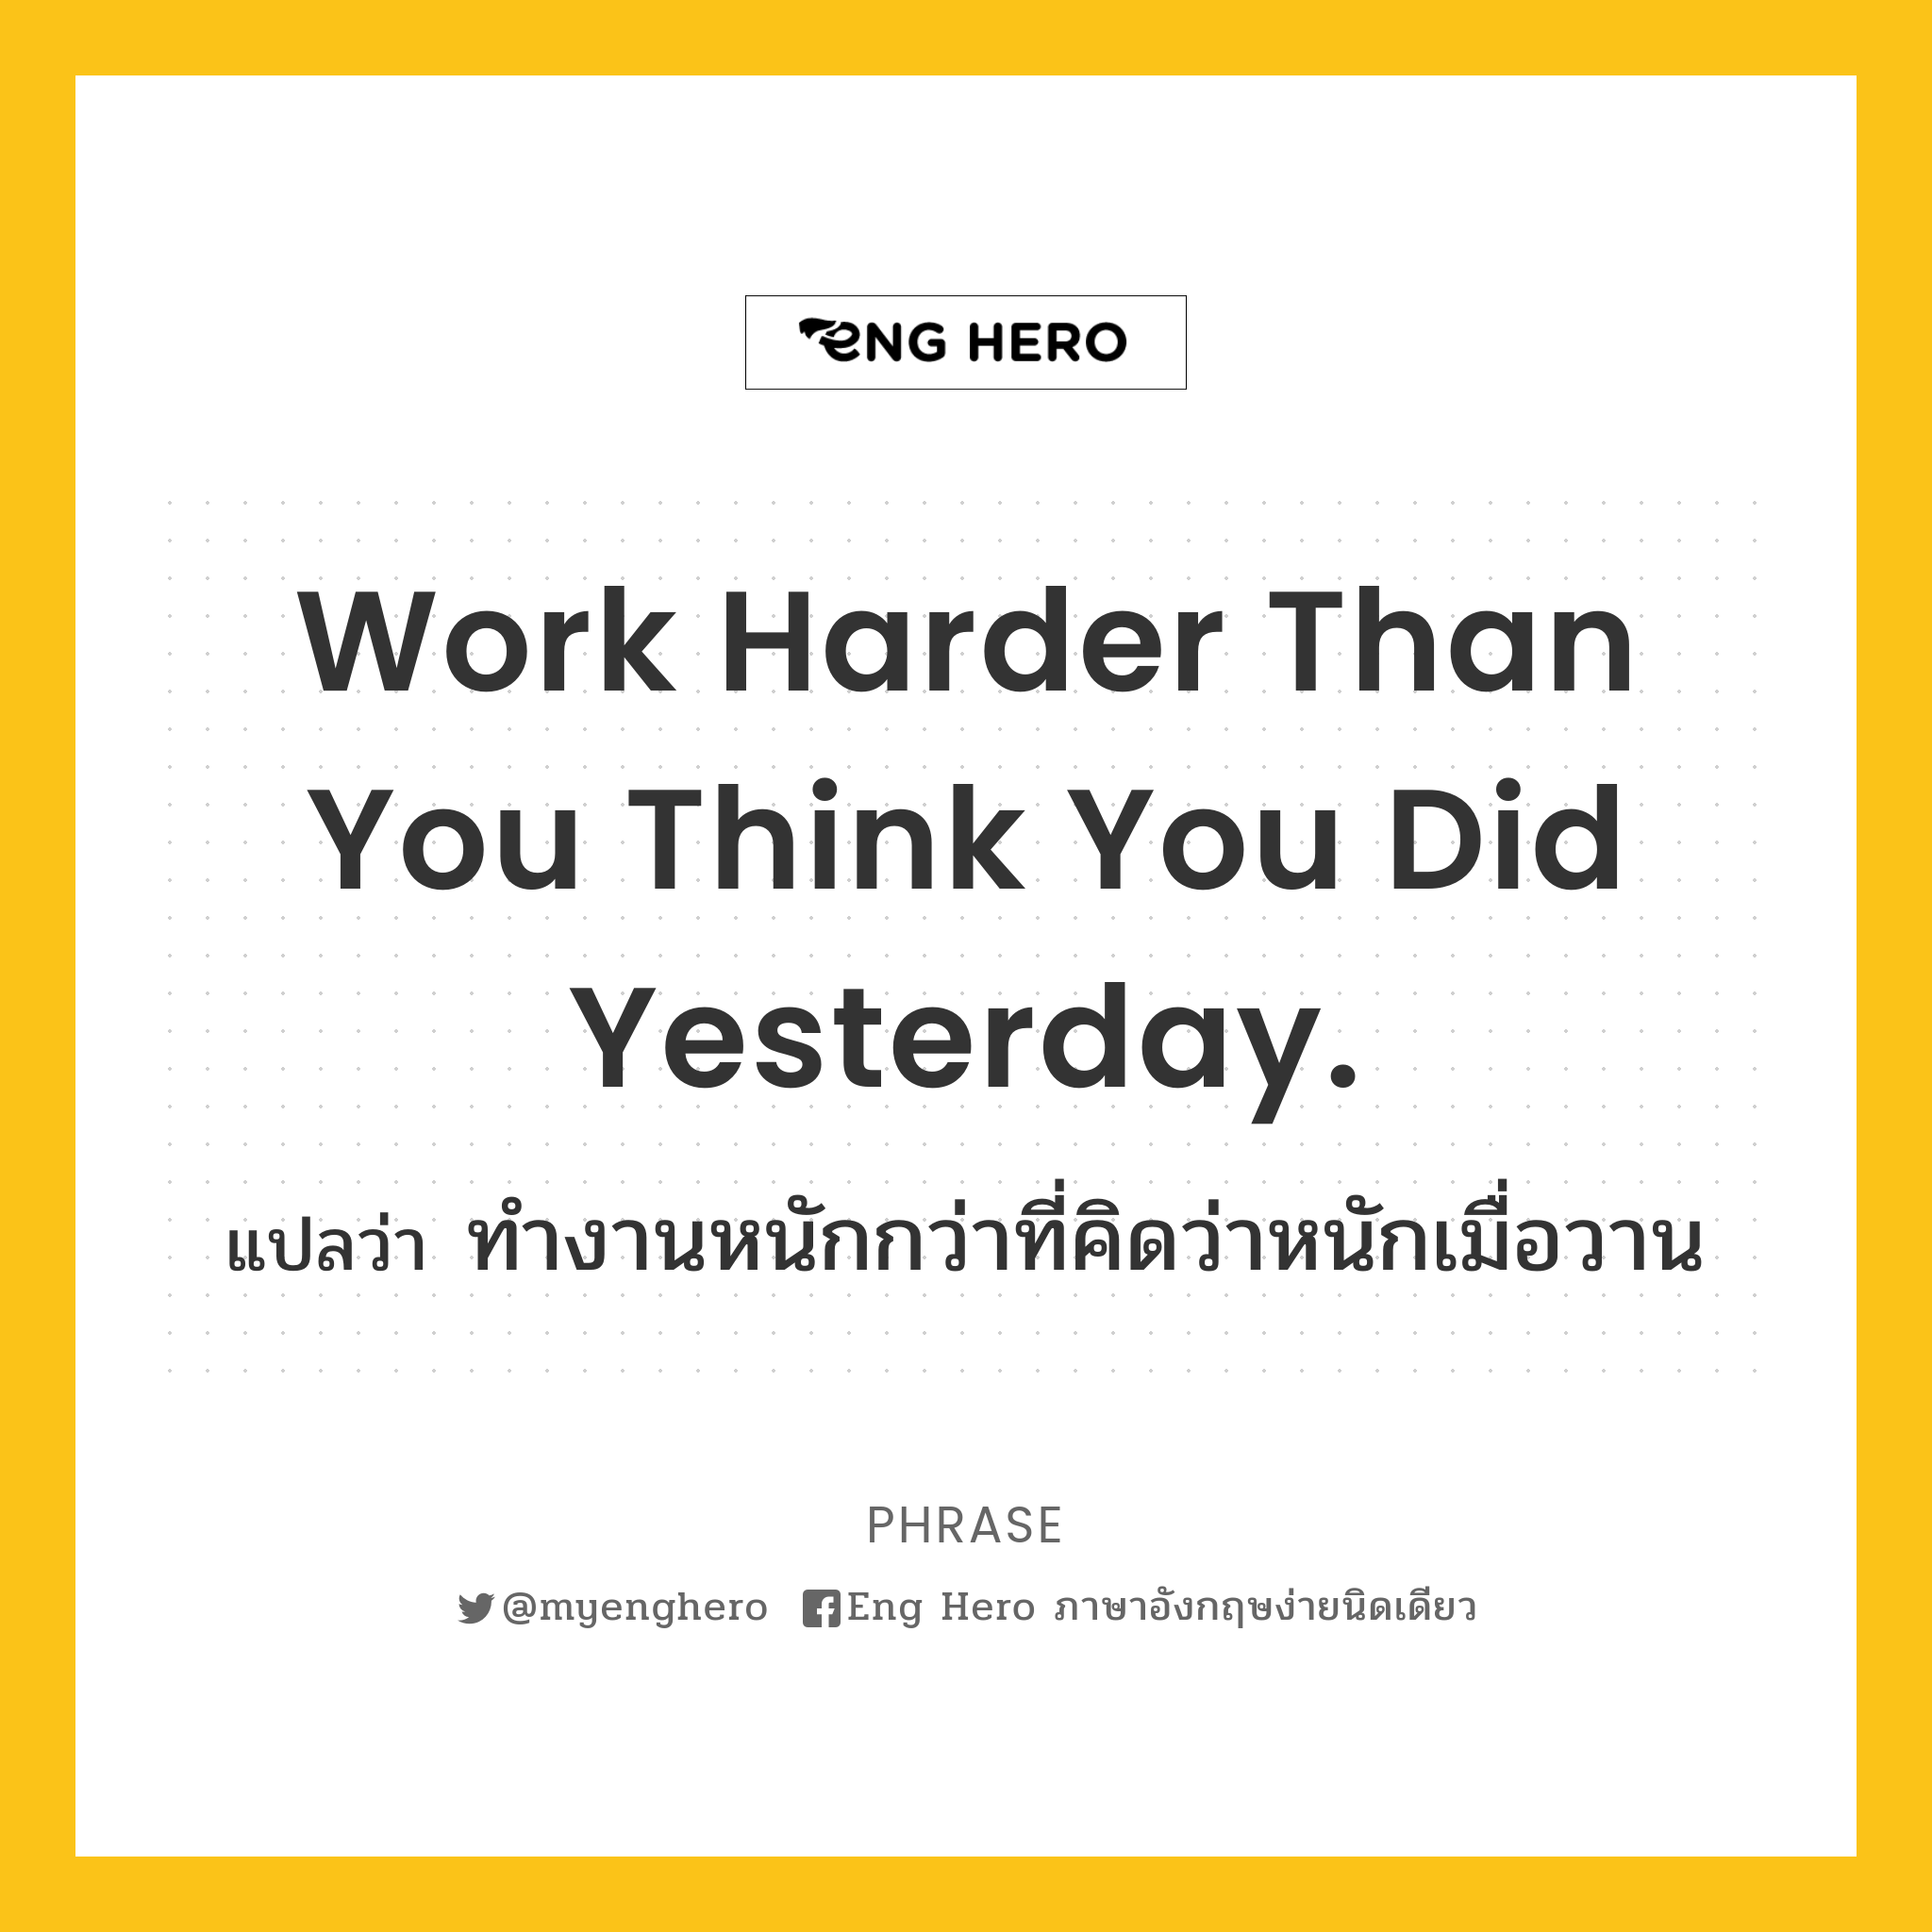 Work harder than you think you did yesterday.